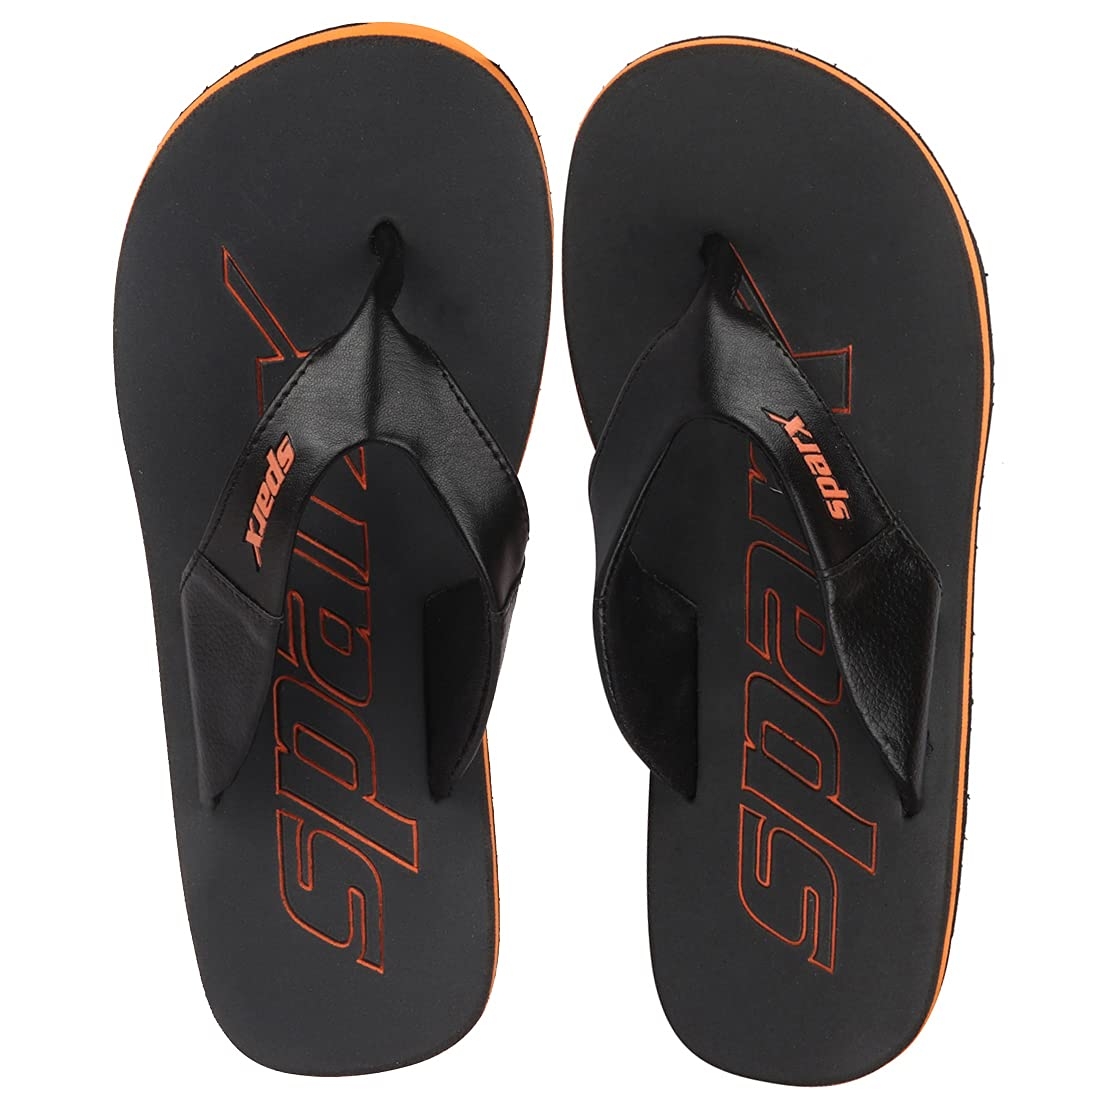 Buy Sparx Men's Flip-Flops and House Slippers at Amazon.in-thanhphatduhoc.com.vn